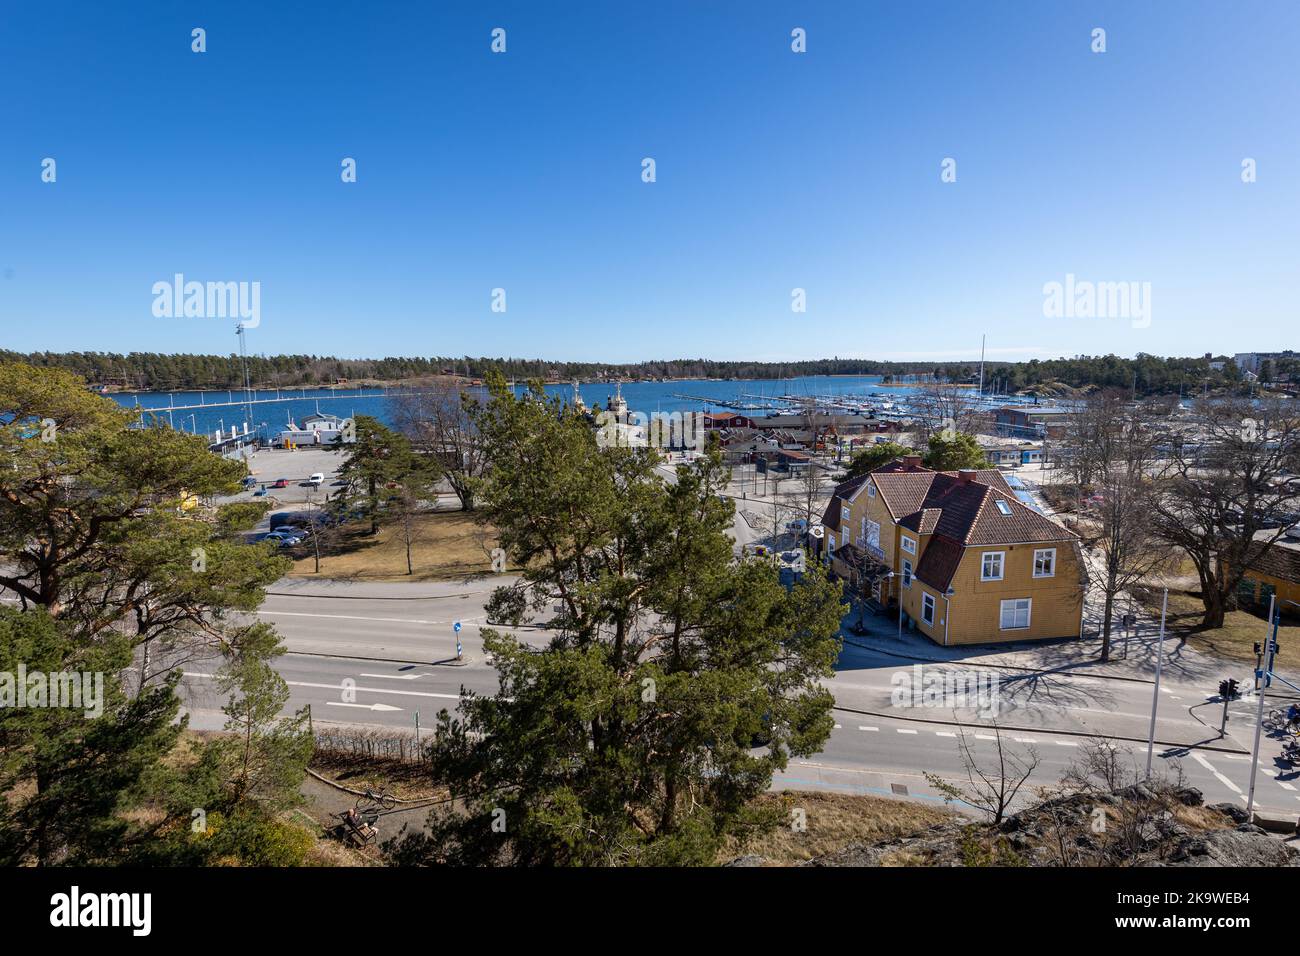 A summer view of the coastal Baltic town of Nynäshamn and its marina taken from the town church. Stock Photo